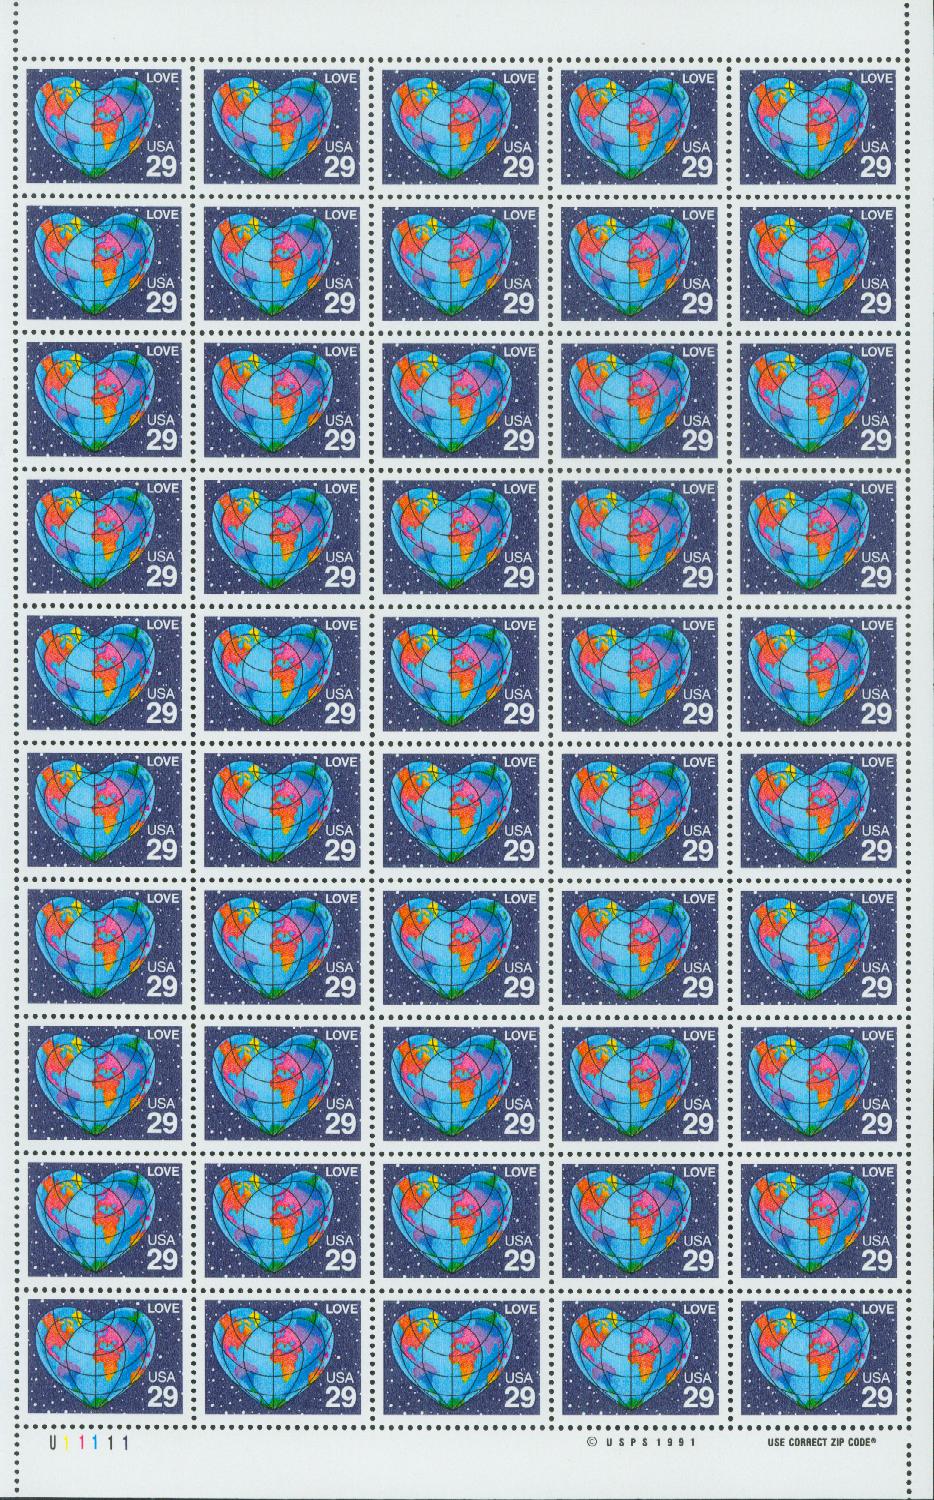 10 Earth Love Stamps Vintage Heart Shaped Planet Earth from Space LOVE  Stamps 29 Cent Postage Stamps for Mailing